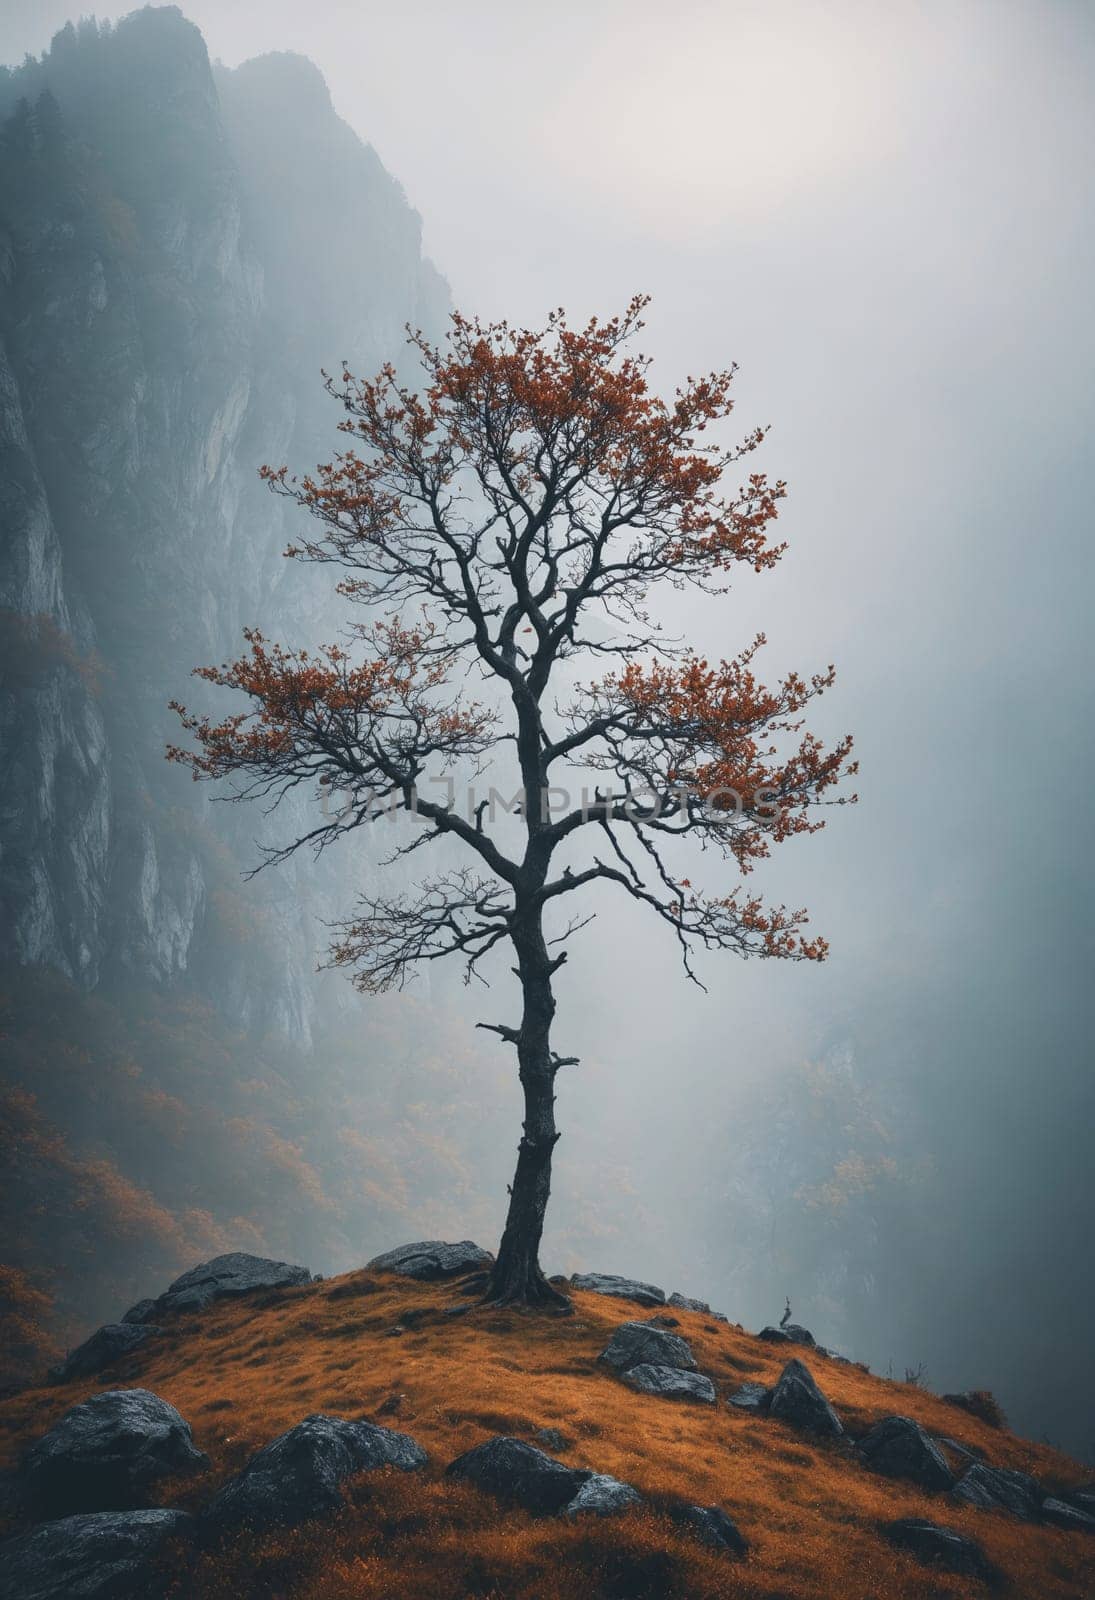 Lone larch tree stands amidst fog in mountain biome by Andre1ns